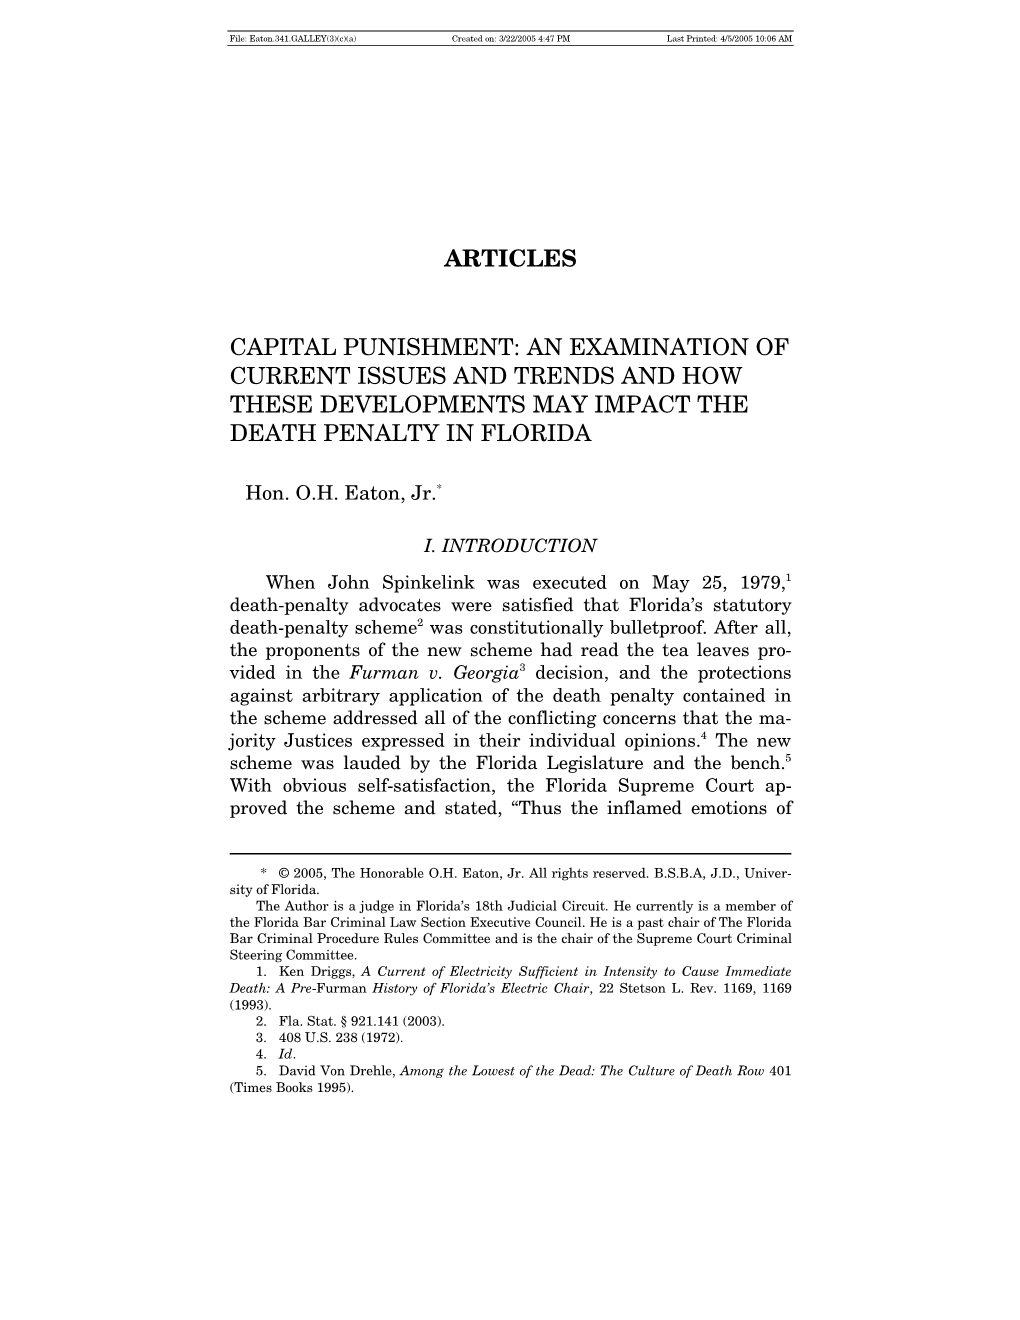 Articles Capital Punishment: an Examination of Current Issues and Trends and How These Developments May Impact the Death Penalty